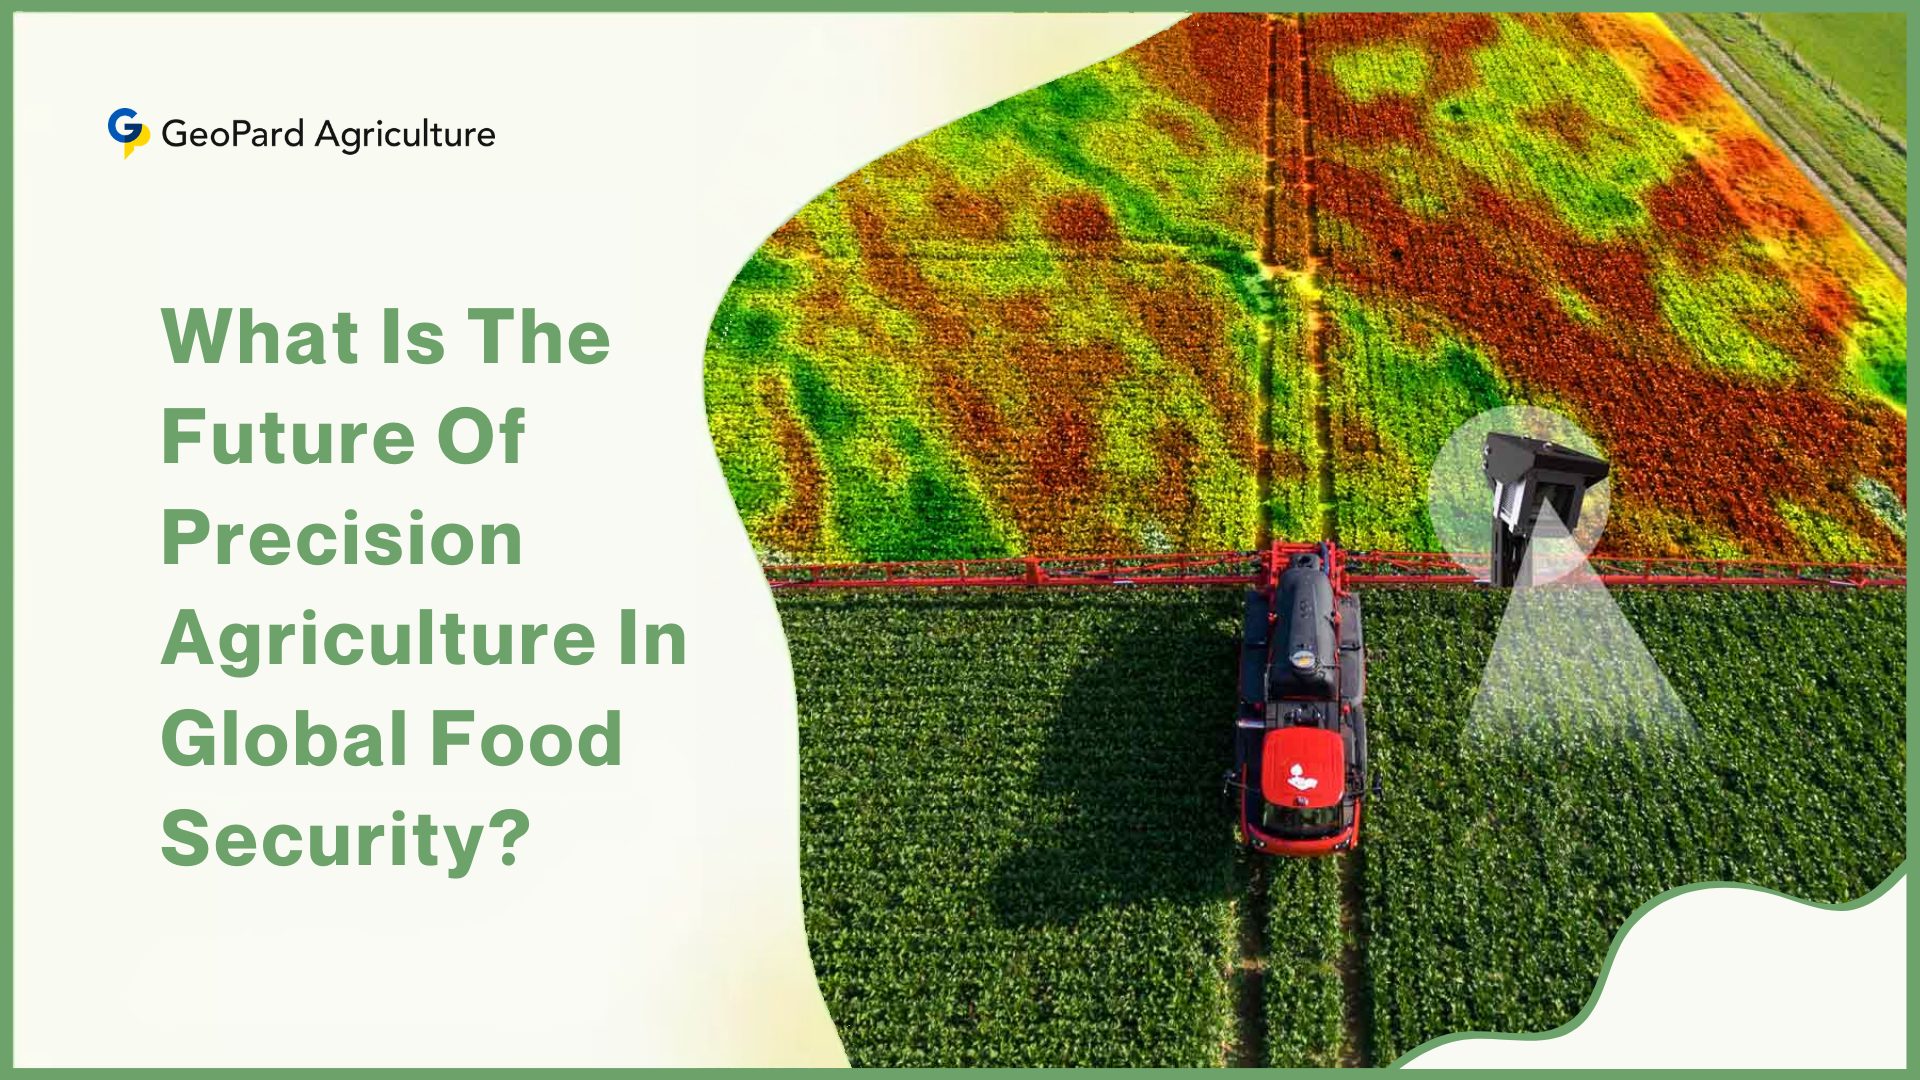 What Is The Future Of Precision Agriculture In Global Food Security